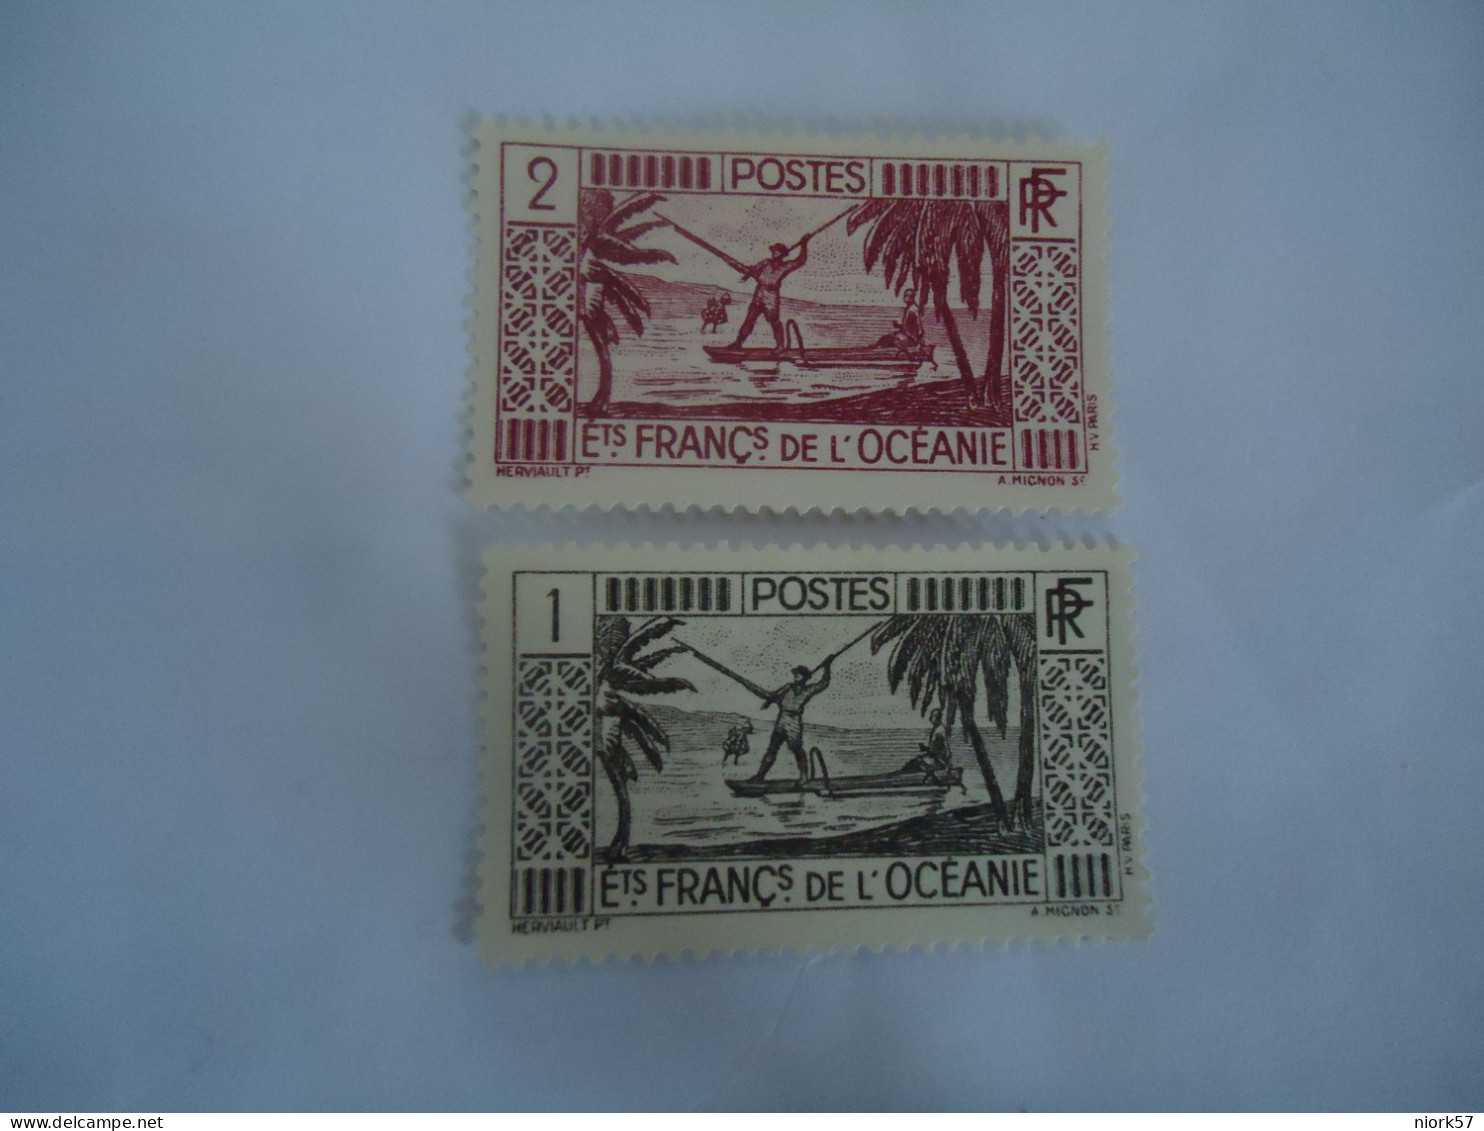 OCEANIA  FRANCE MLN STAMPS 2 FISHERMEN - Used Stamps